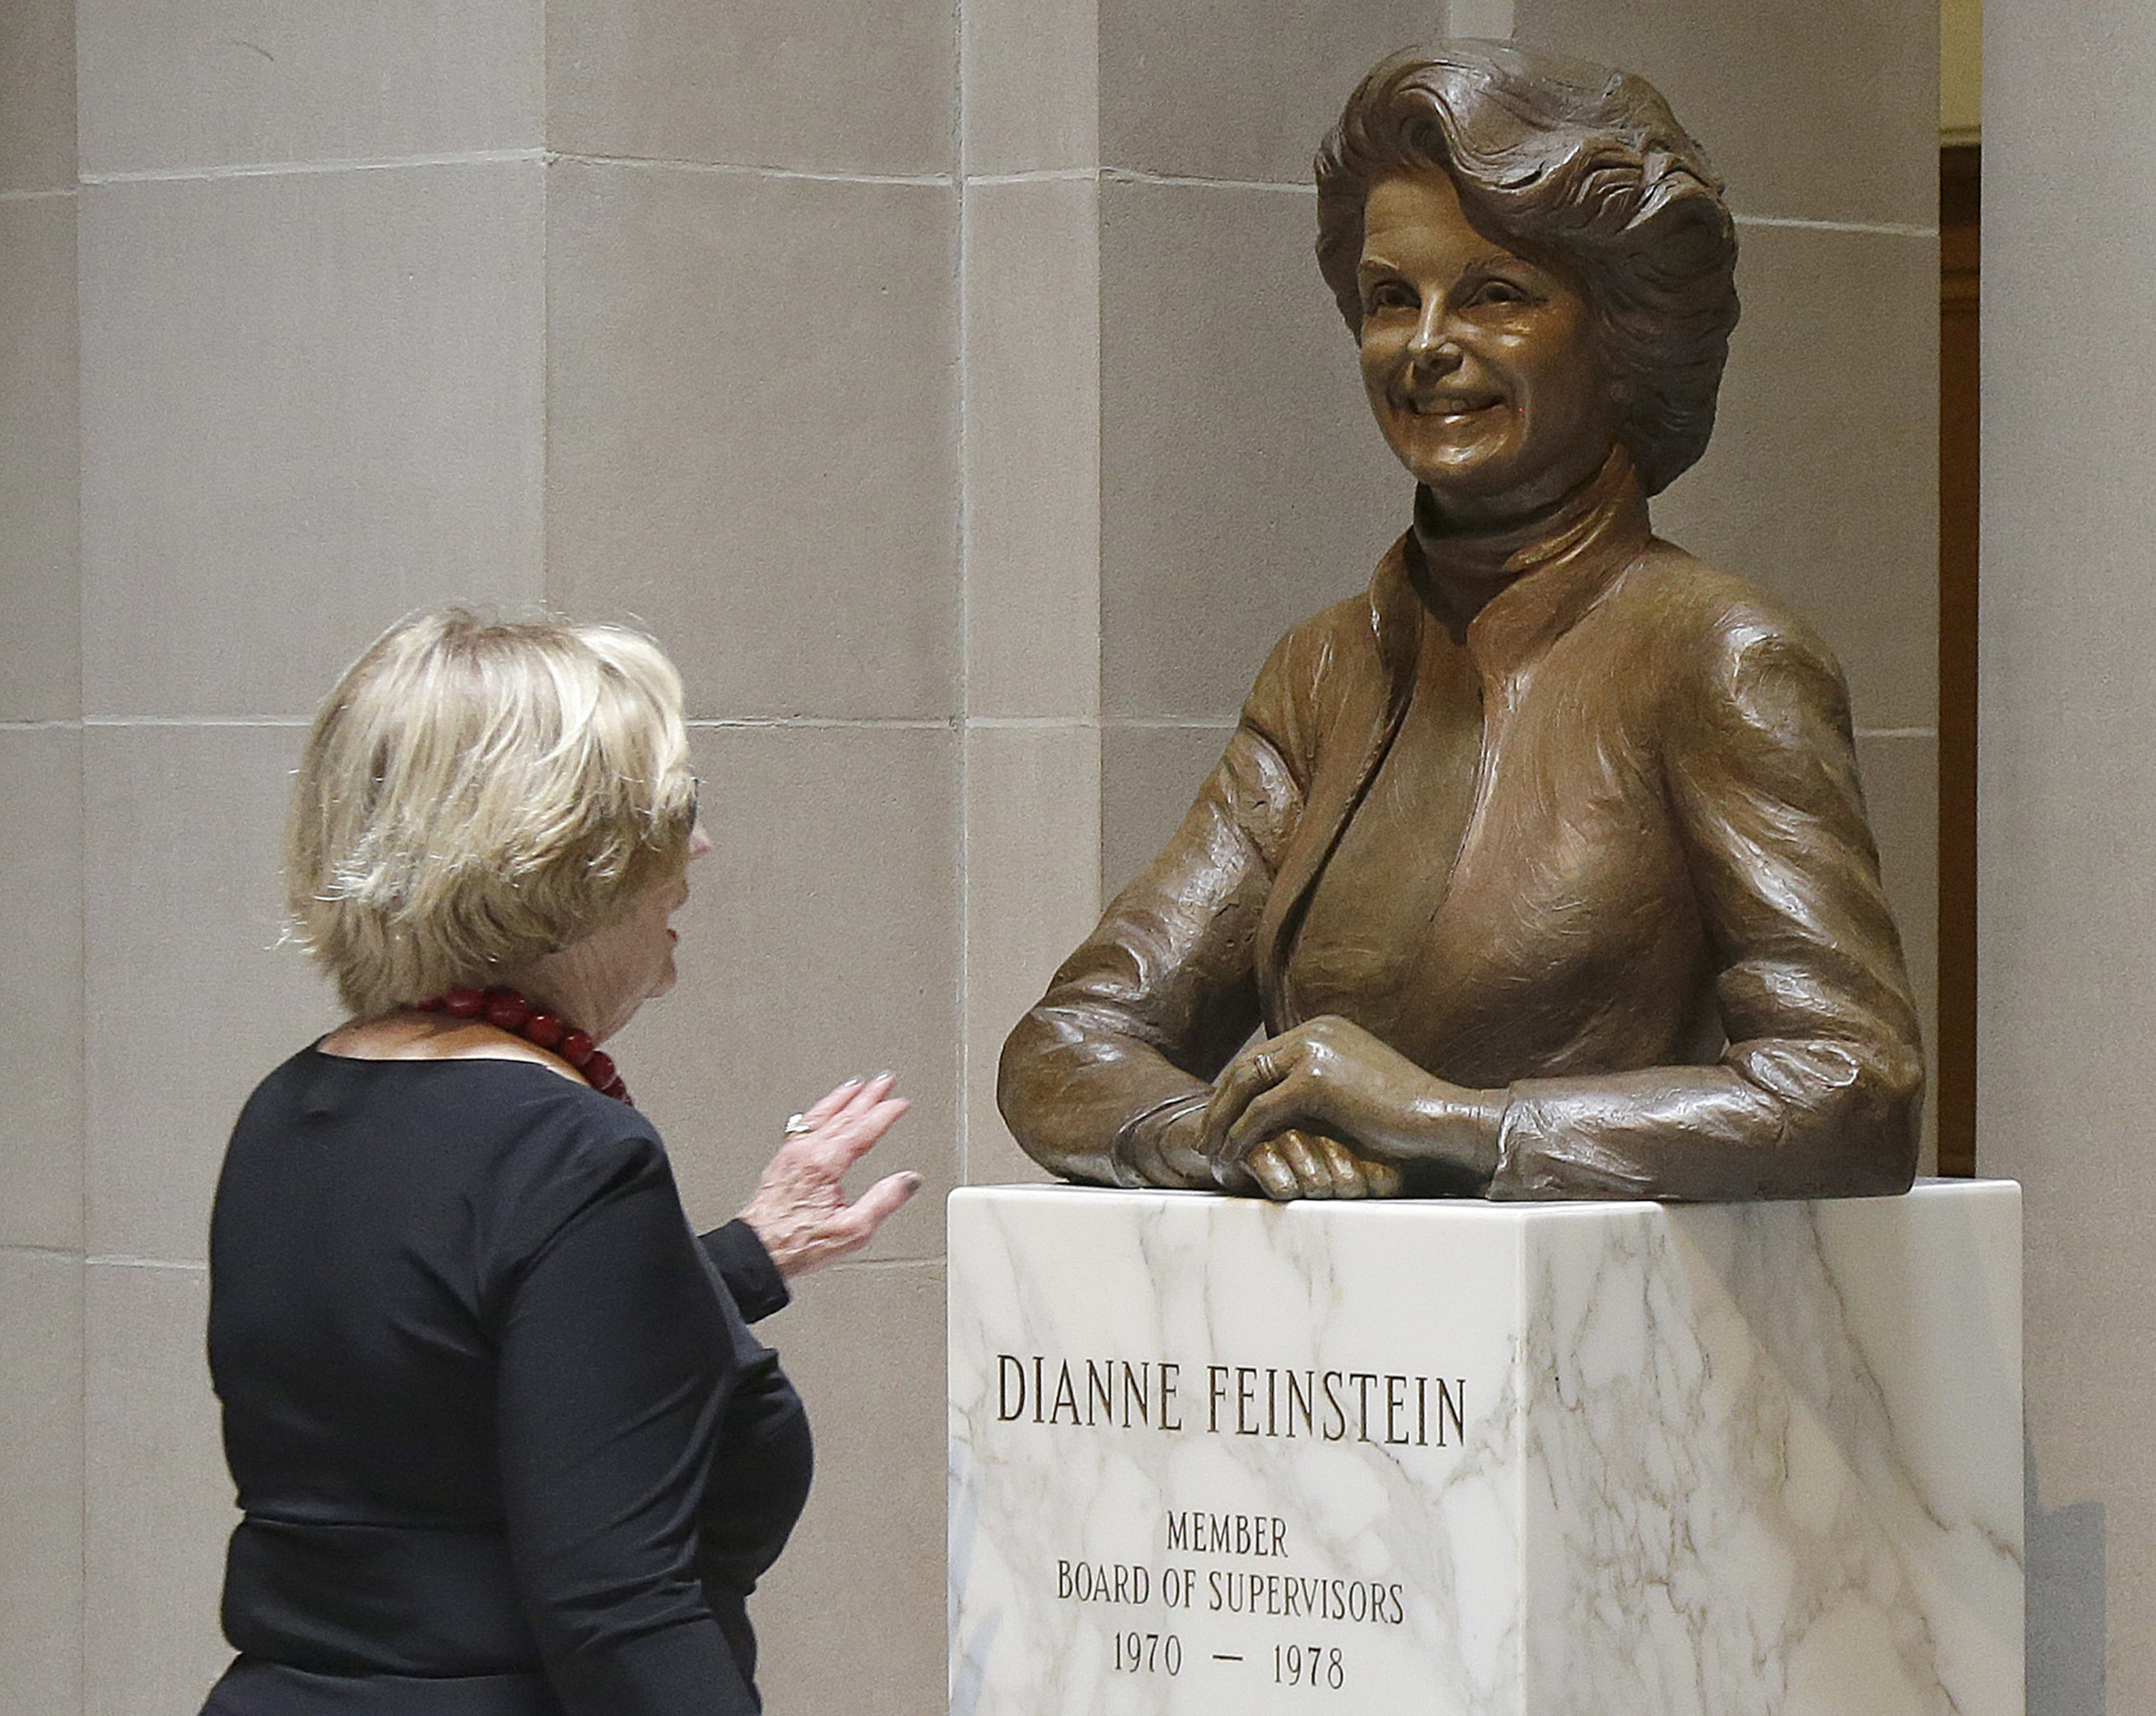 A woman walks toward the statue of Dianne Feinstein at City Hall in San Francisco, on In this June 26, 2017. (Jeff Chiu—AP)